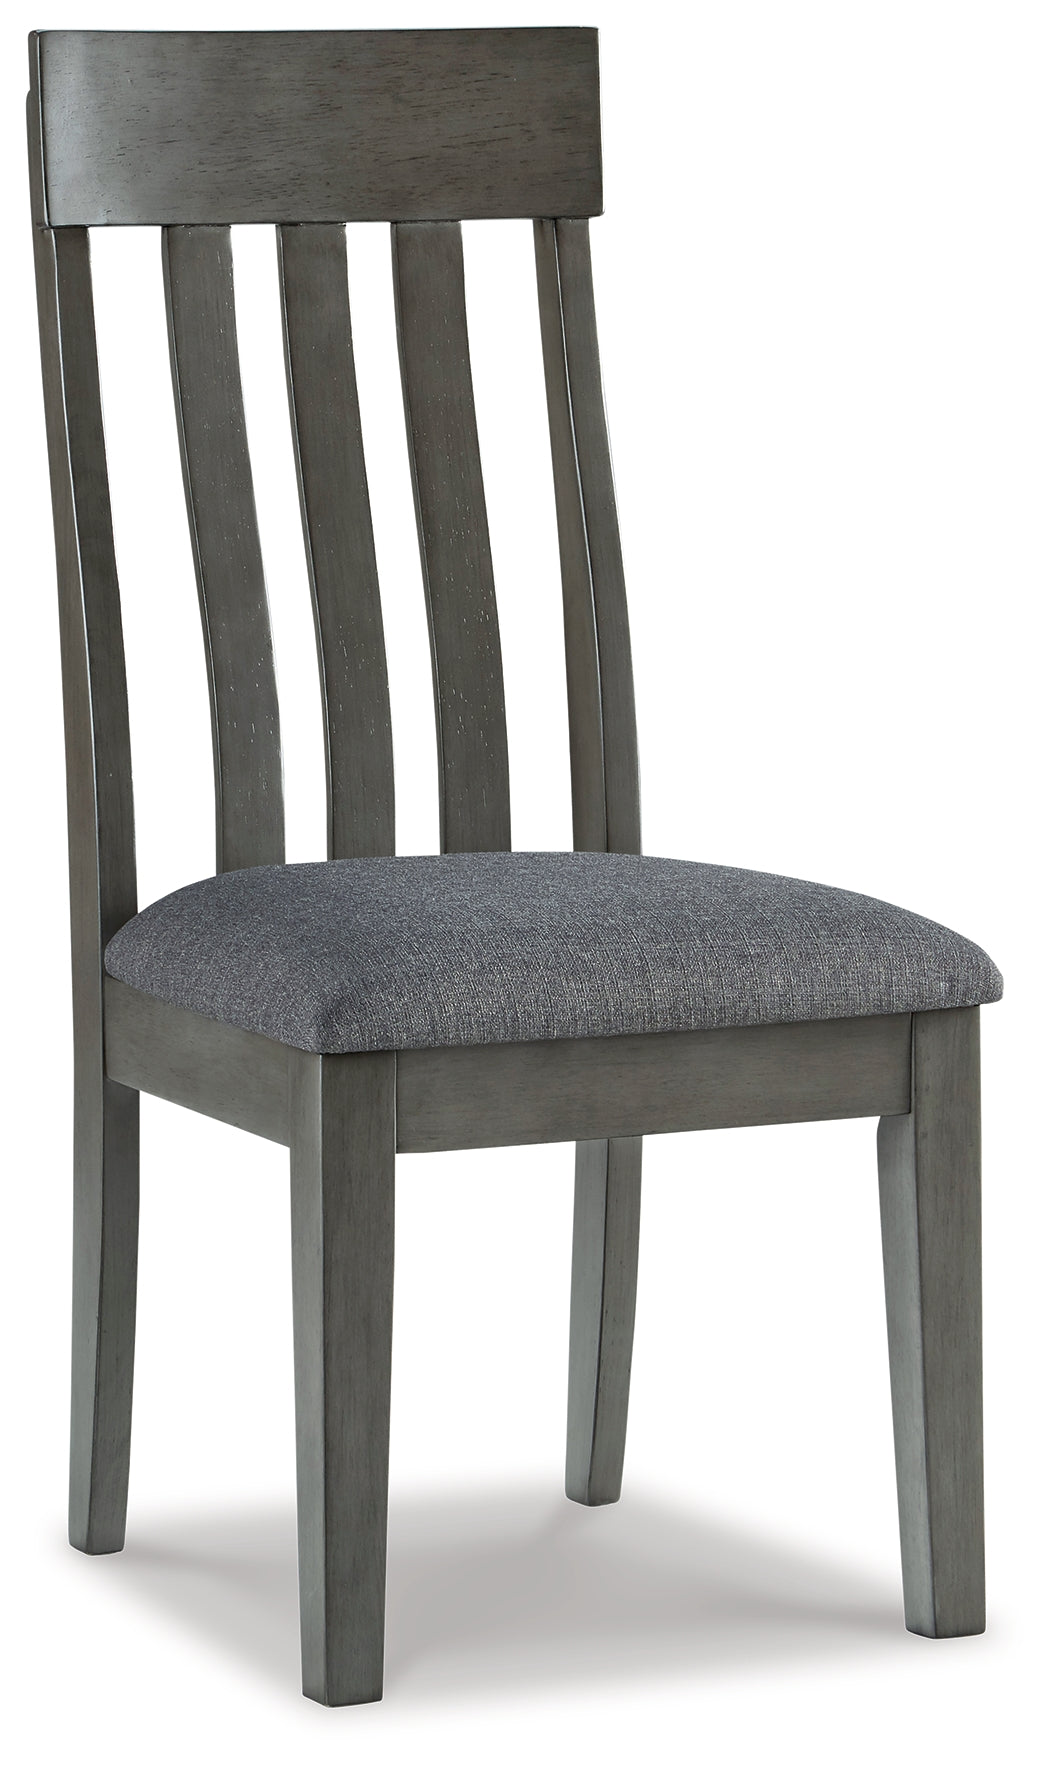 Gray Hallanden Dining Table and 6 Chairs with Storage - PKG010486